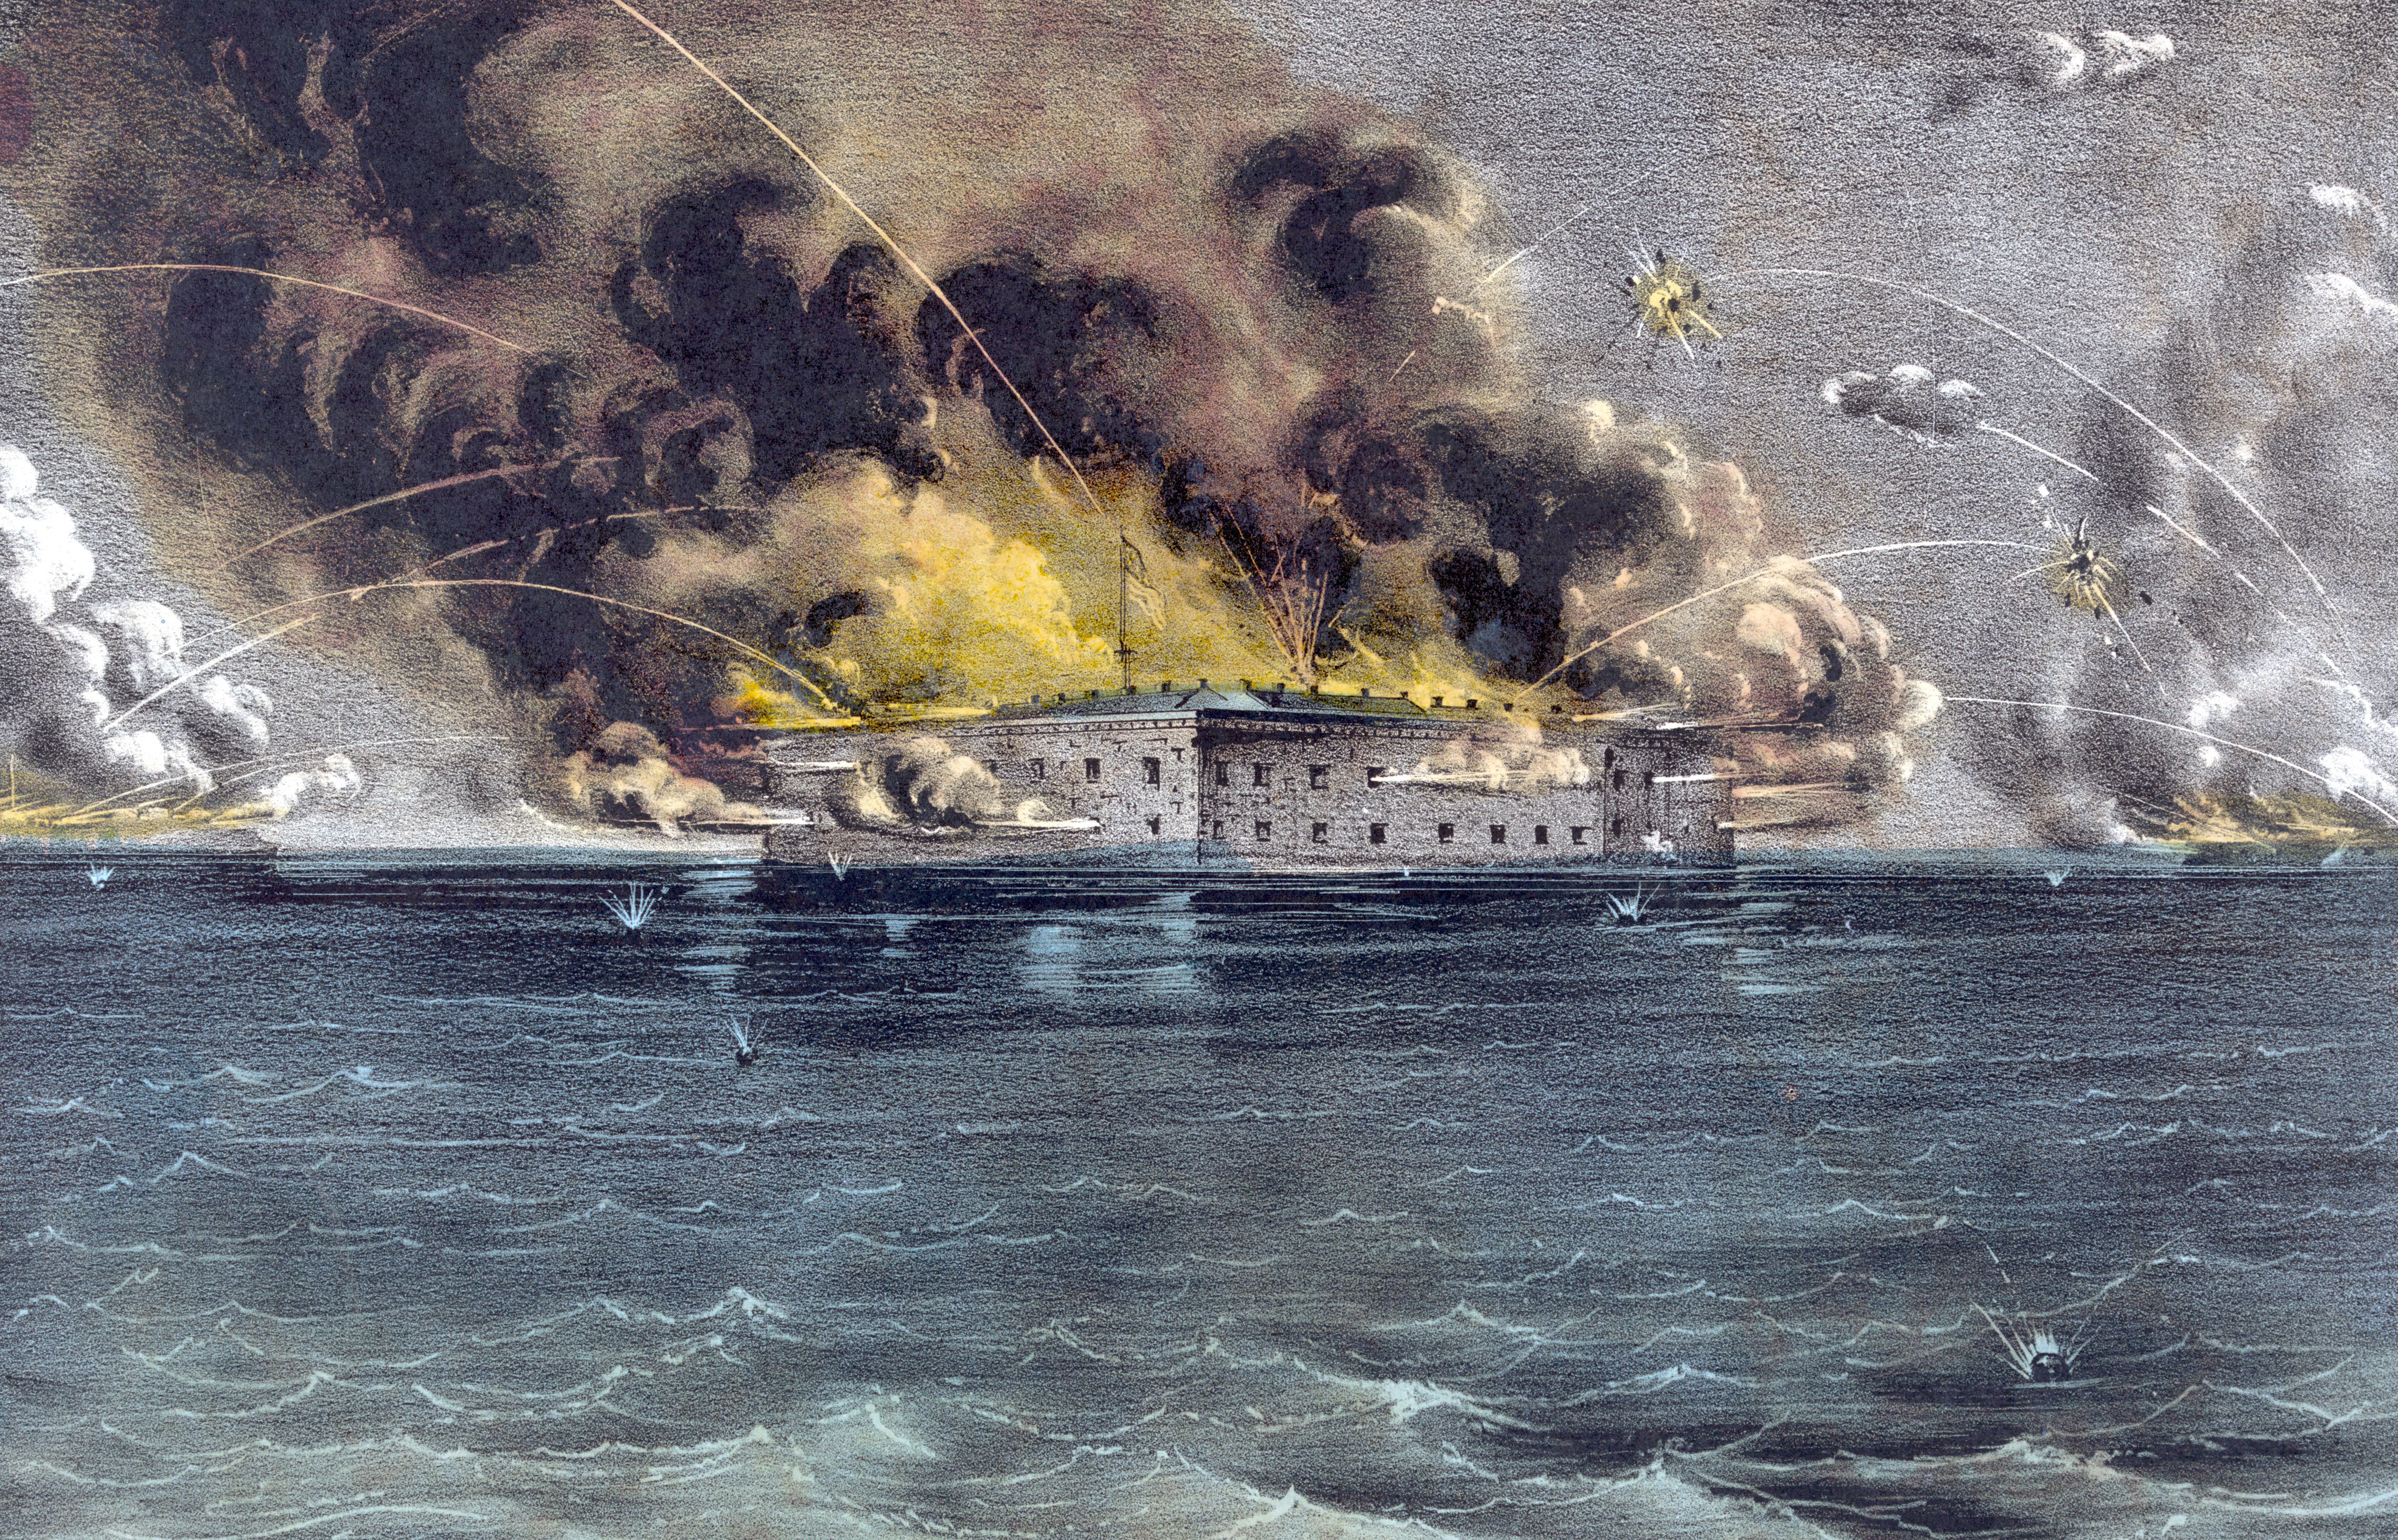 Fort-Sumer-1861bombardment-4500-56a48868